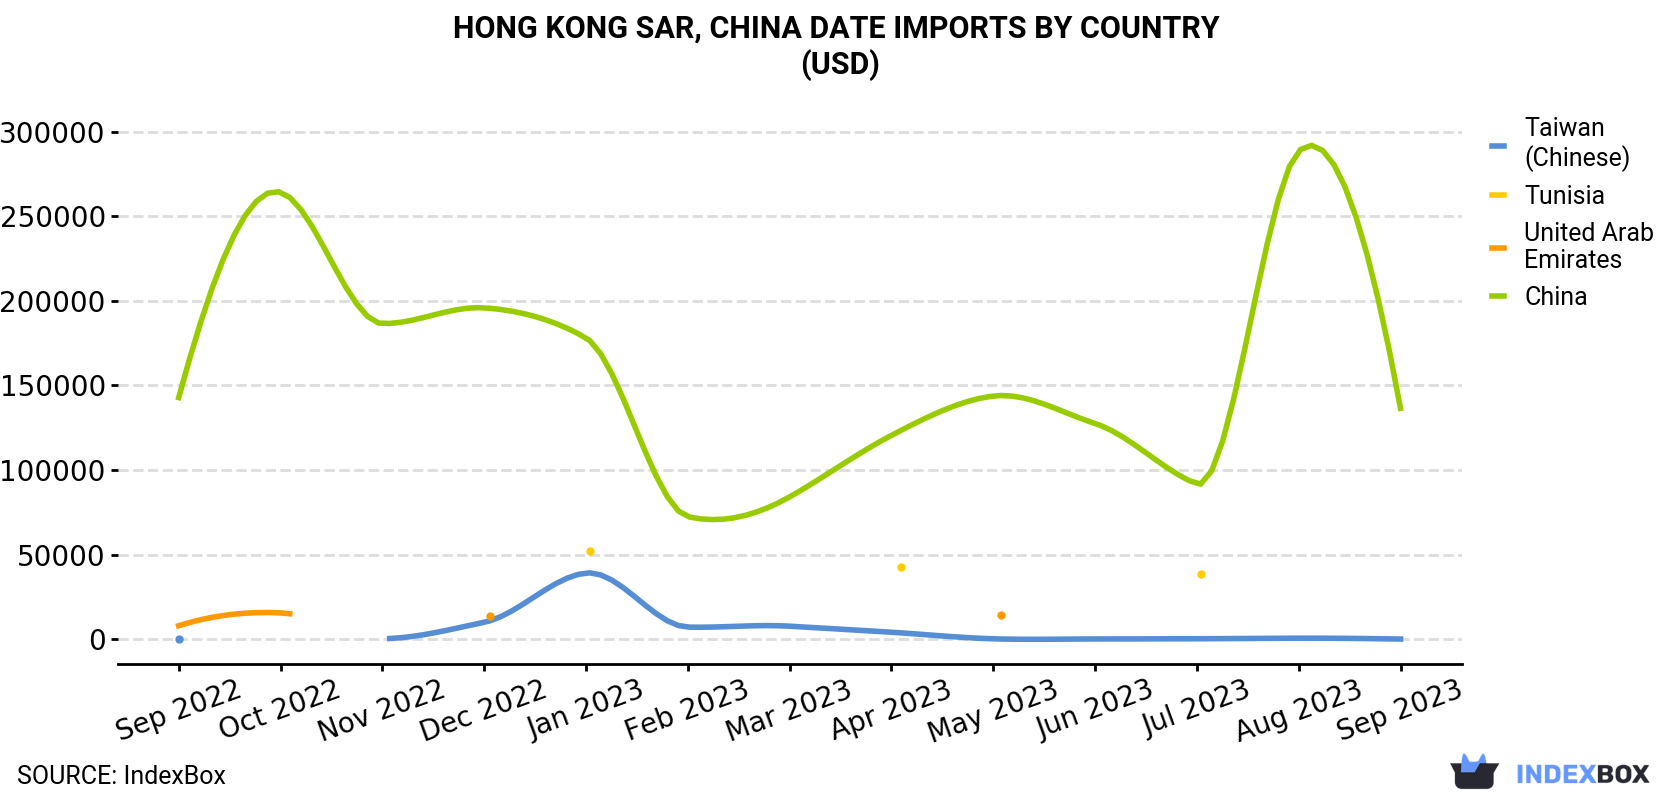 Hong Kong Date Imports By Country (USD)